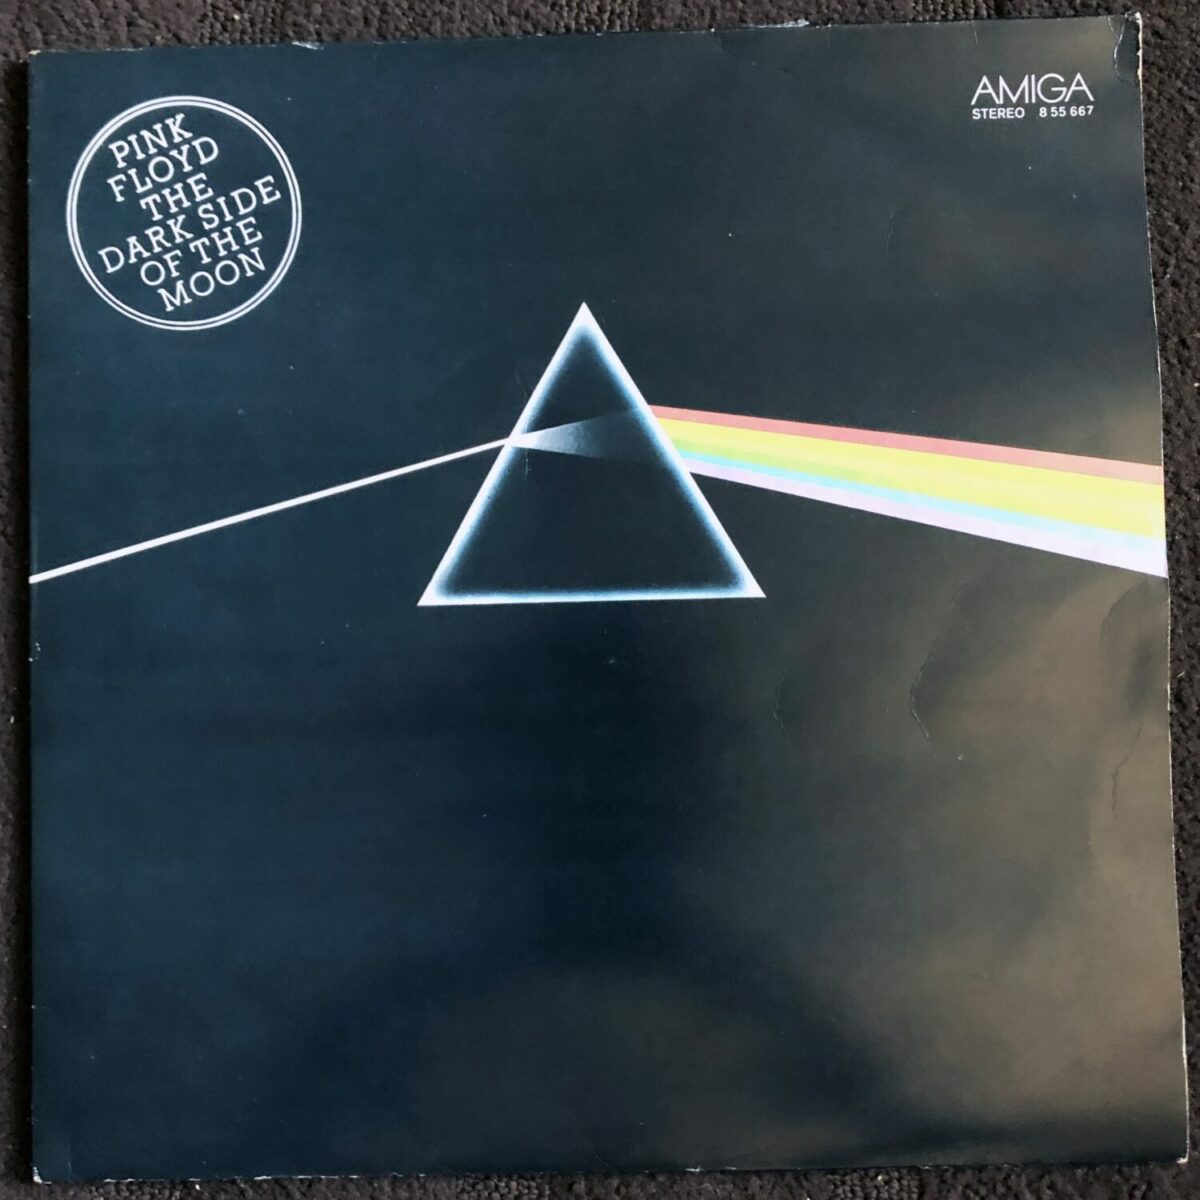 "The dark side of the moon" by Pink Floyd